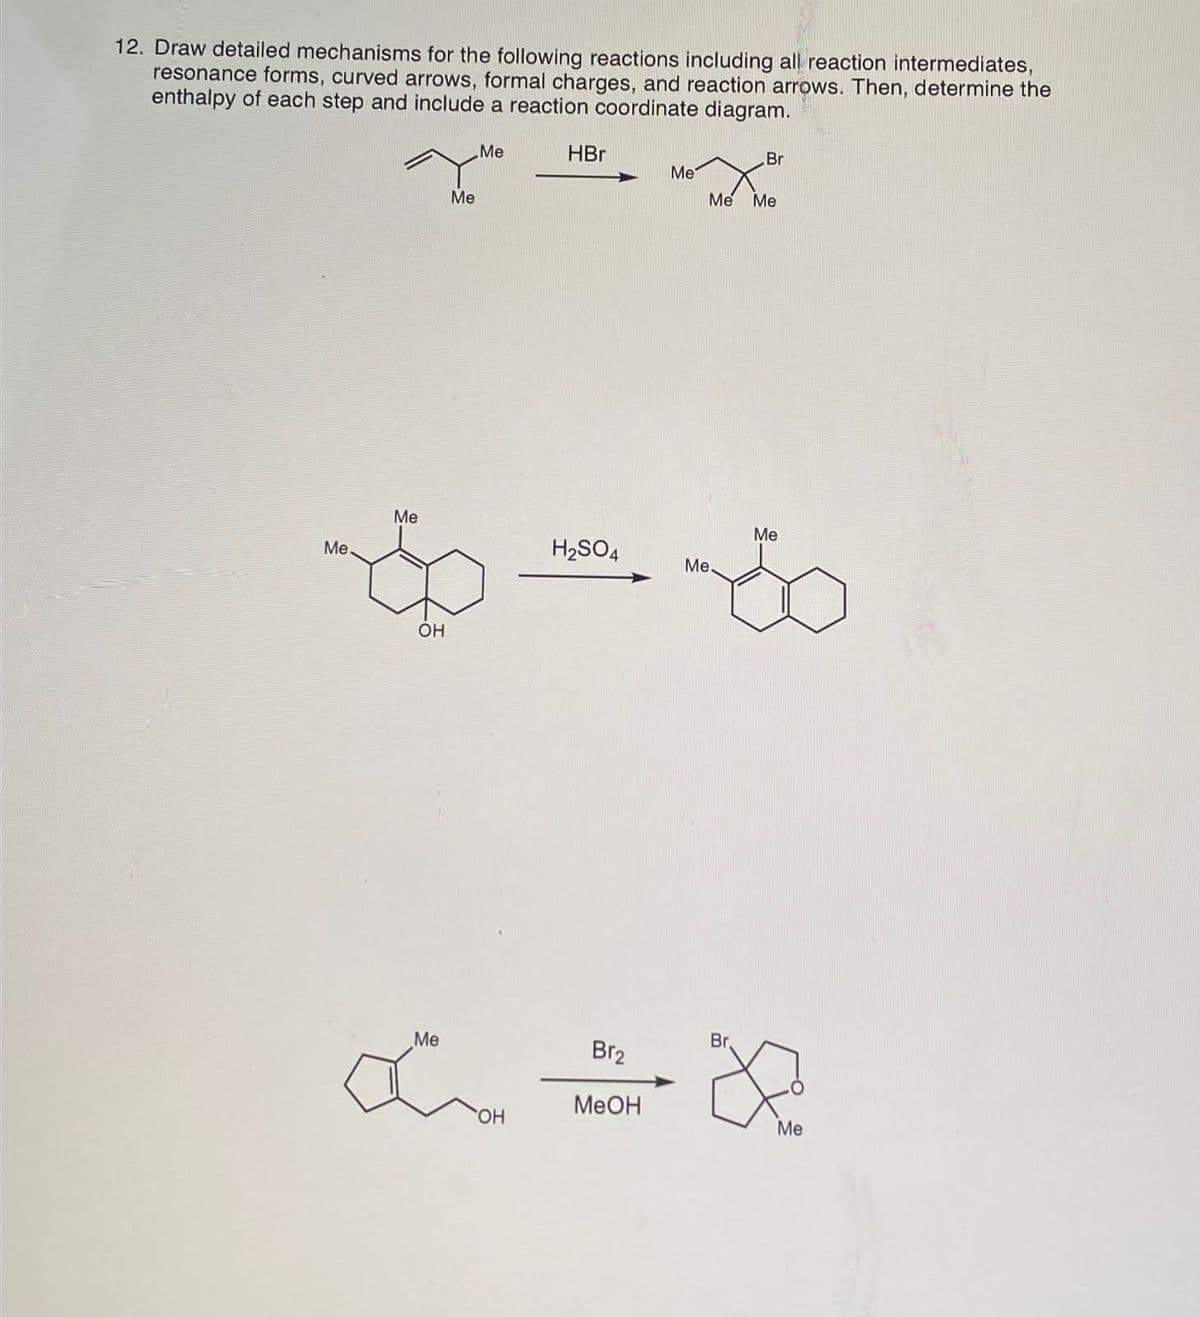 12. Draw detailed mechanisms for the following reactions including all reaction intermediates,
resonance forms, curved arrows, formal charges, and reaction arrows. Then, determine the
enthalpy of each step and include a reaction coordinate diagram.
Me
Me
Me
HBr
Br
Me
Me Me
Me
Me
H2SO4
Me.
OH
Me
Br2
Br
α ∞
OH
MeOH
Me